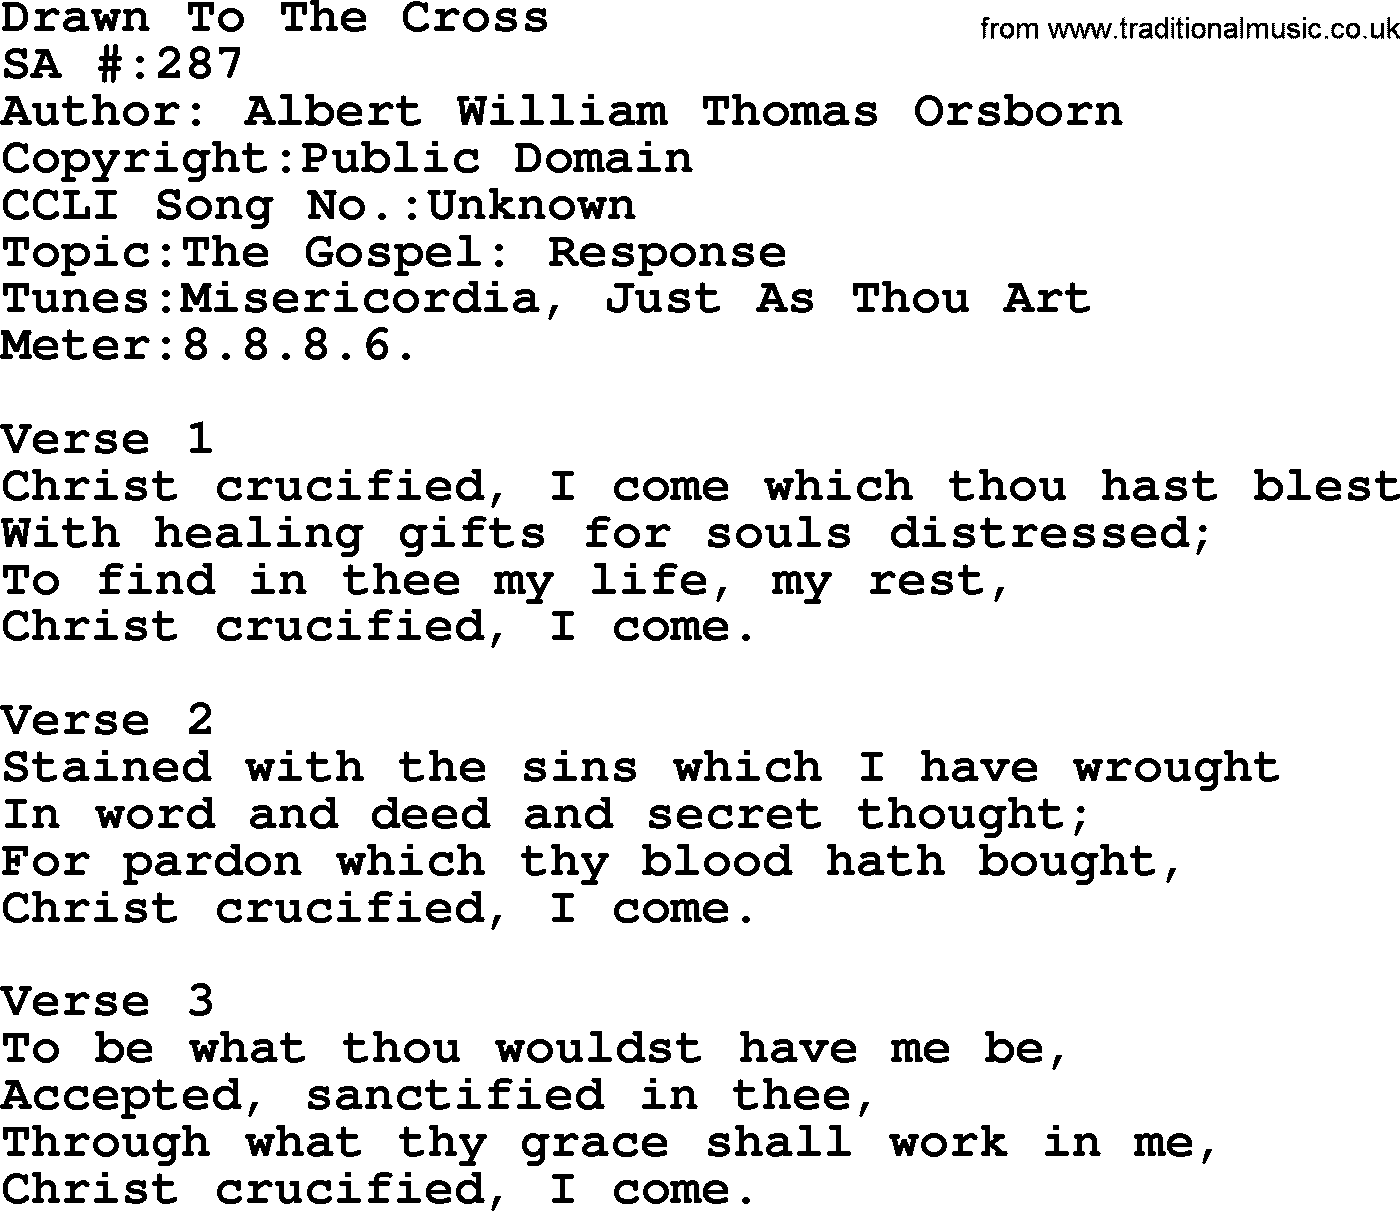 Salvation Army Hymnal, title: Drawn To The Cross, with lyrics and PDF,